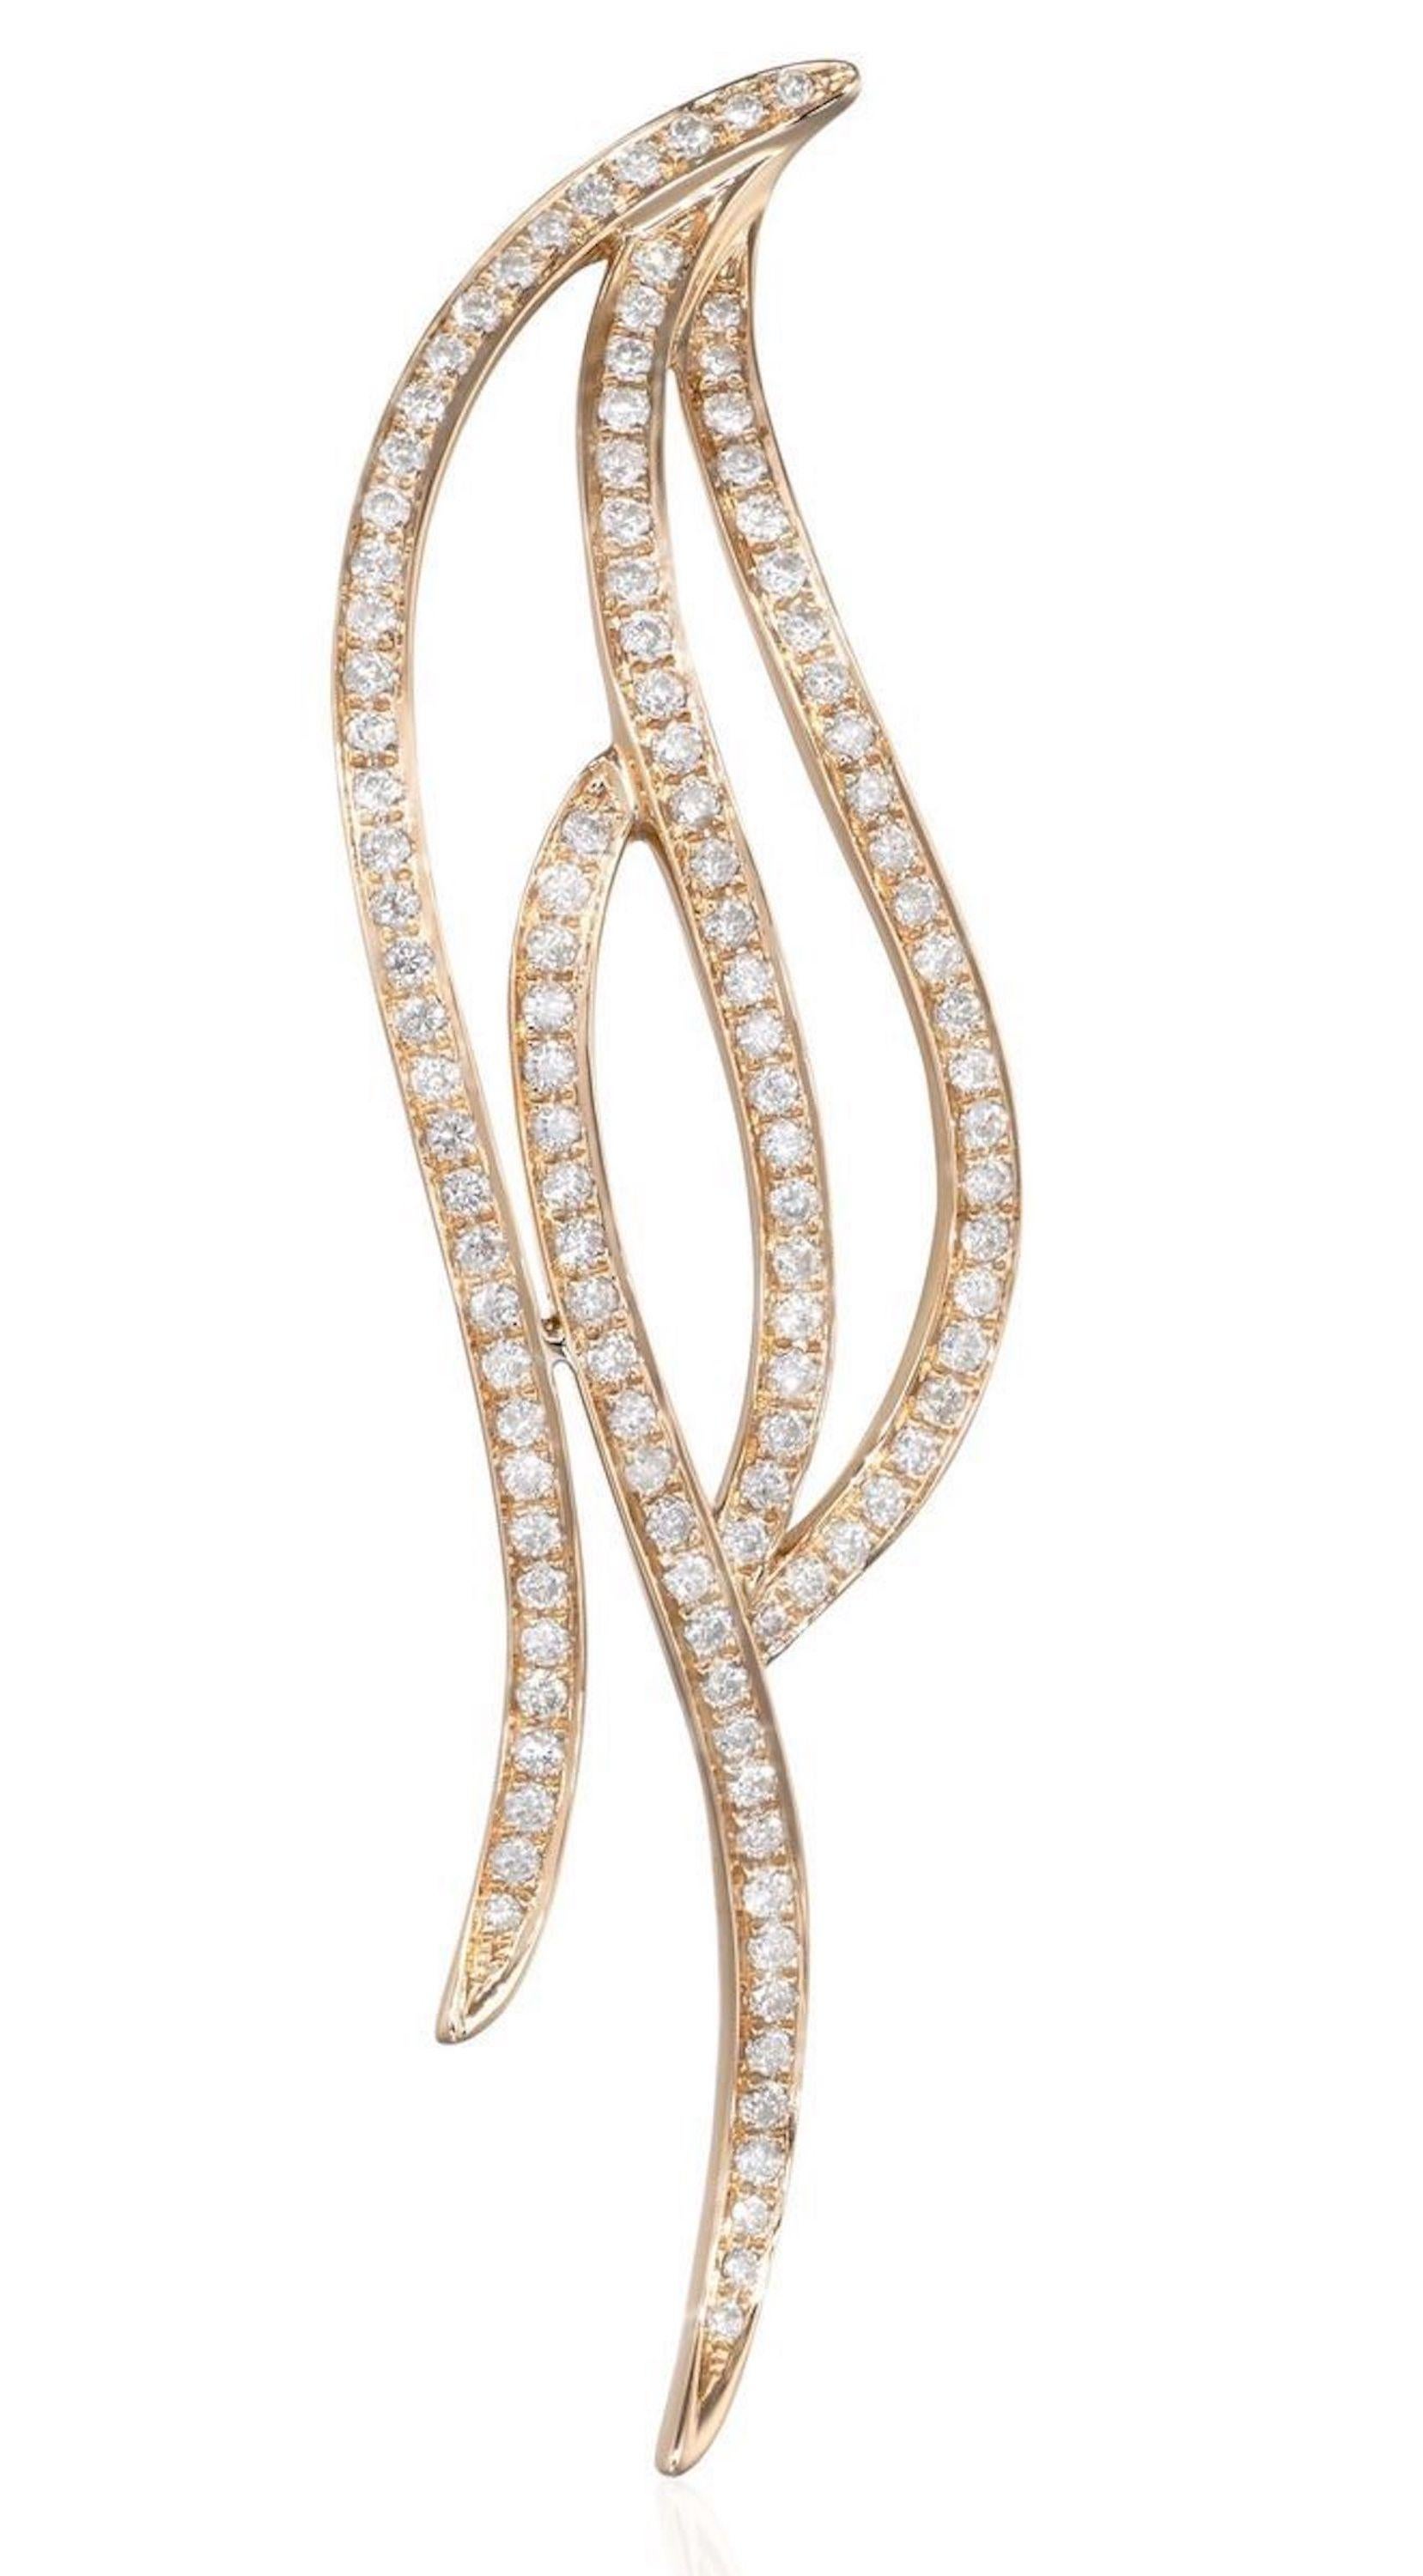 AS29
18kt rose gold flow long 4-lines diamond earrings

Offering modern women the perfect cure to diamond envy with a unique provocative take on fine jewellery, AS29 is all about being bold and feminine as seen in these 18kt gold and diamond